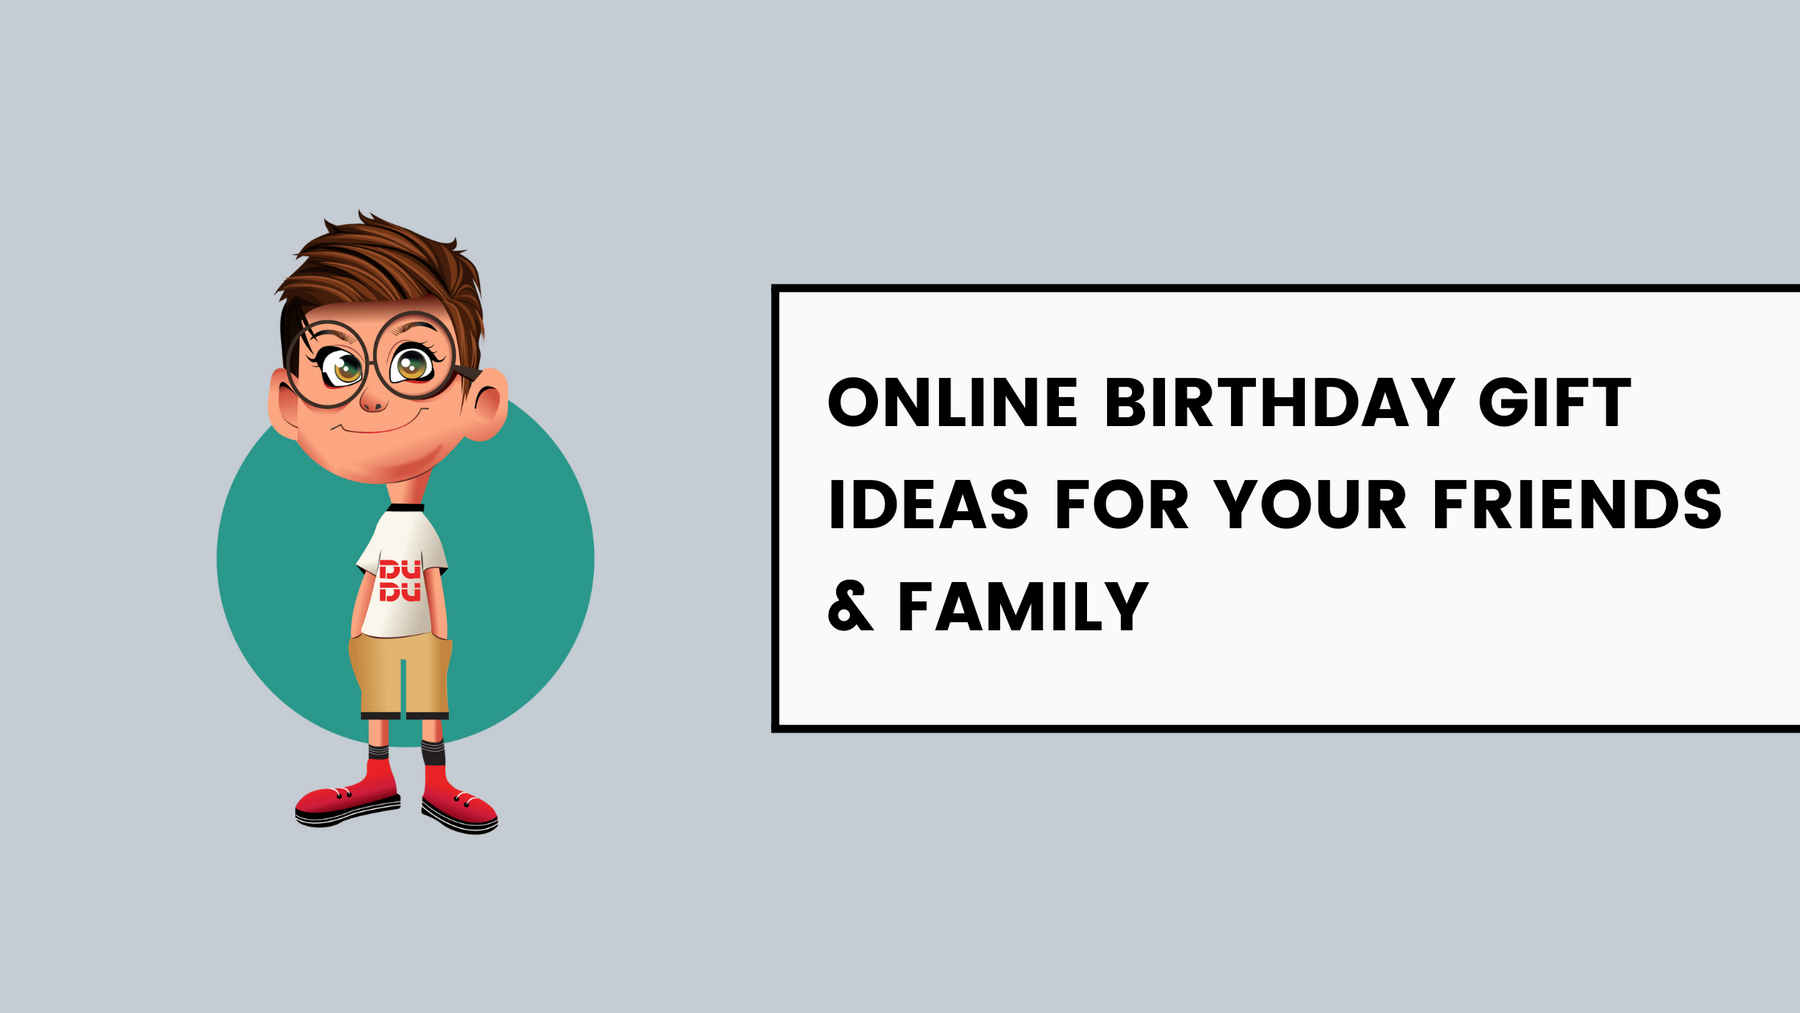 Online Birthday Gift Ideas for Your Friends & Family